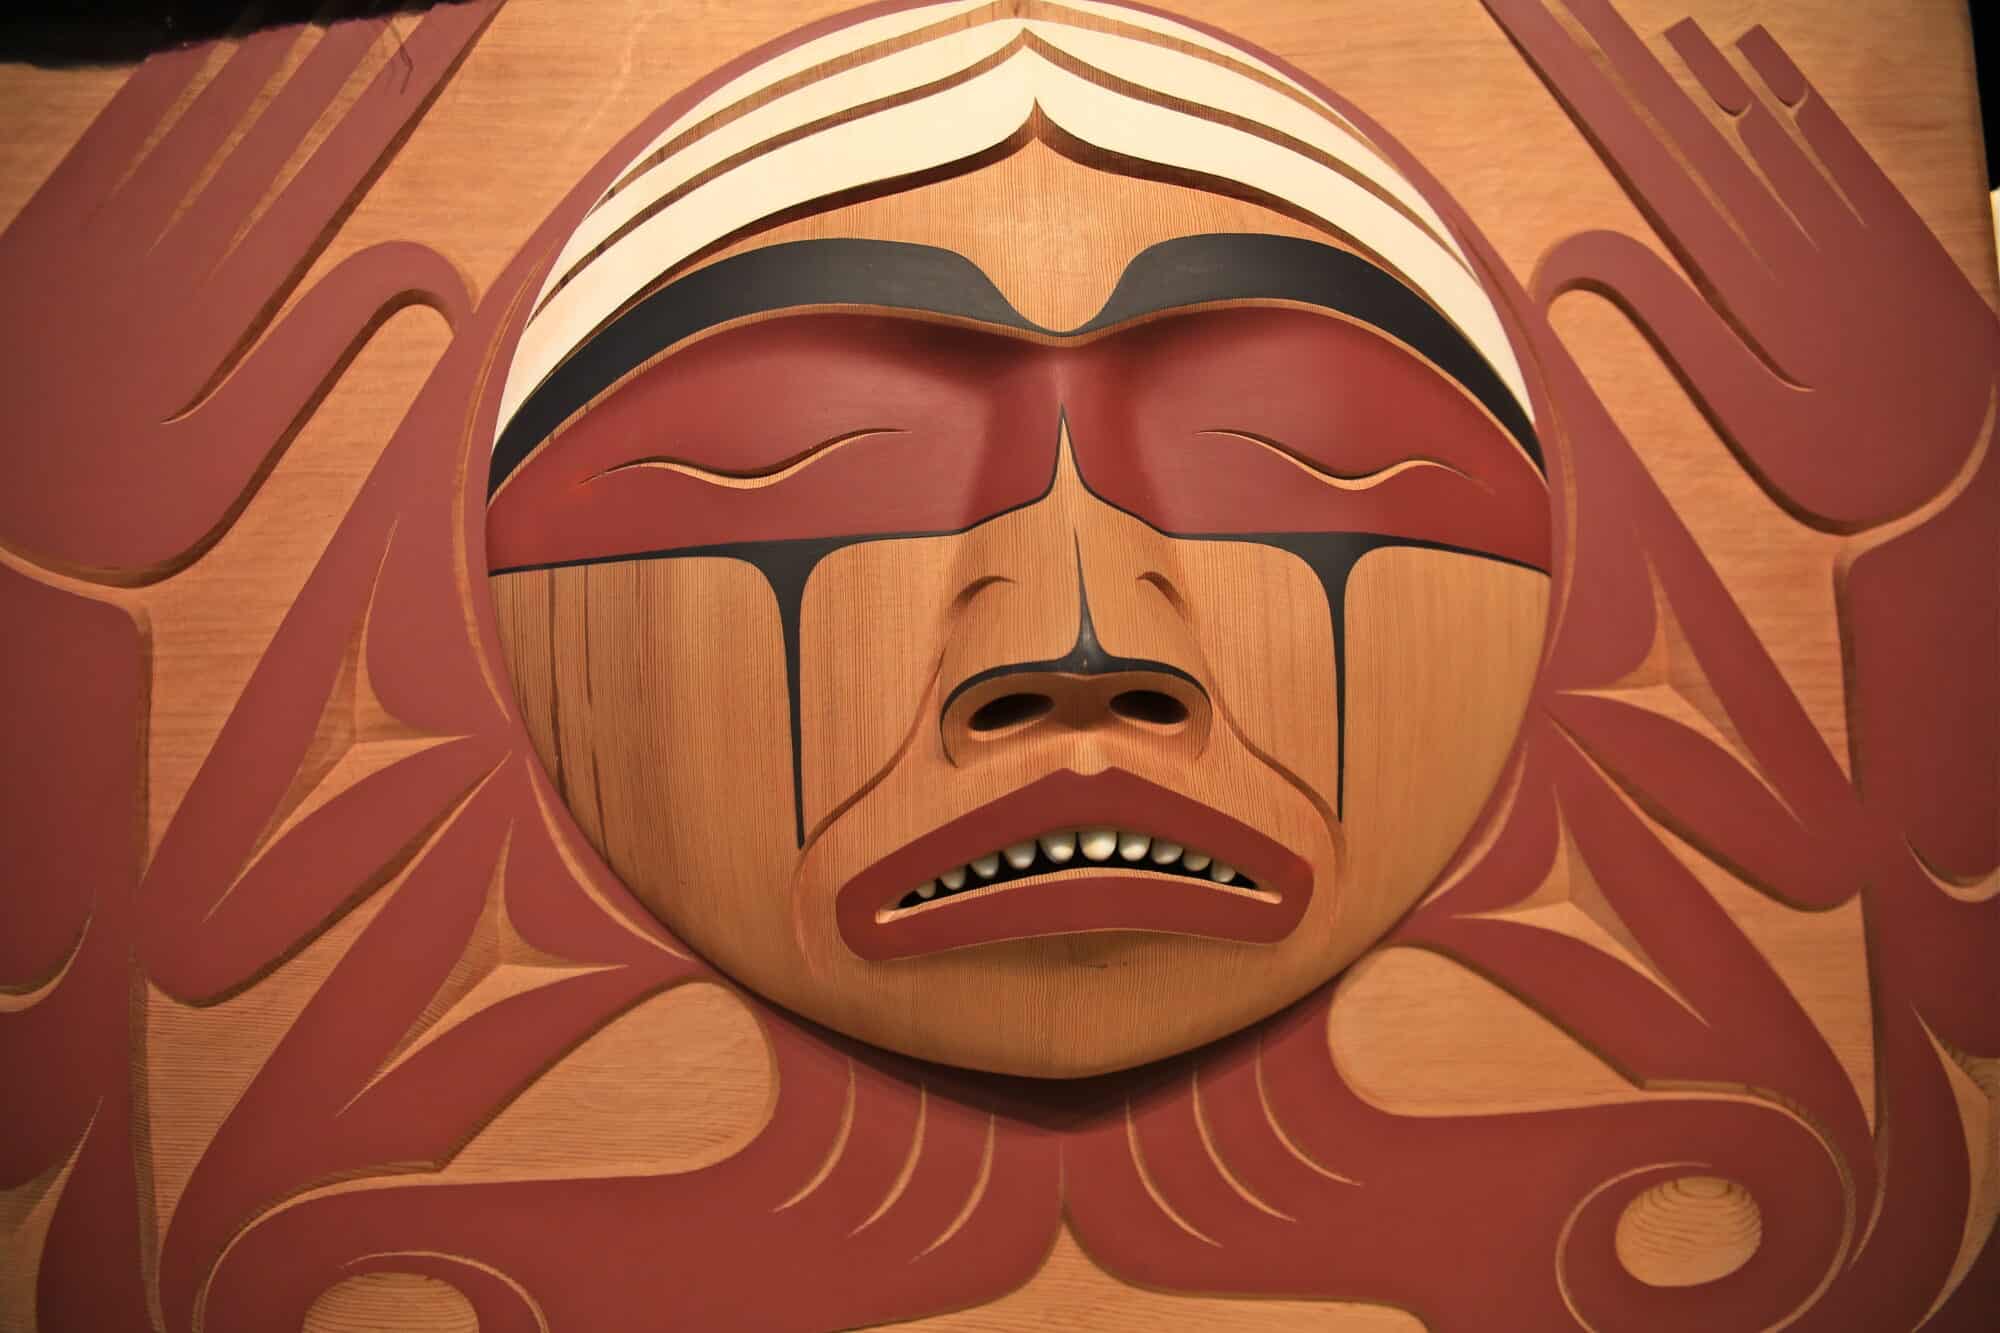 Wood carving art commissioned for the Truth and Reconciliation Commission.